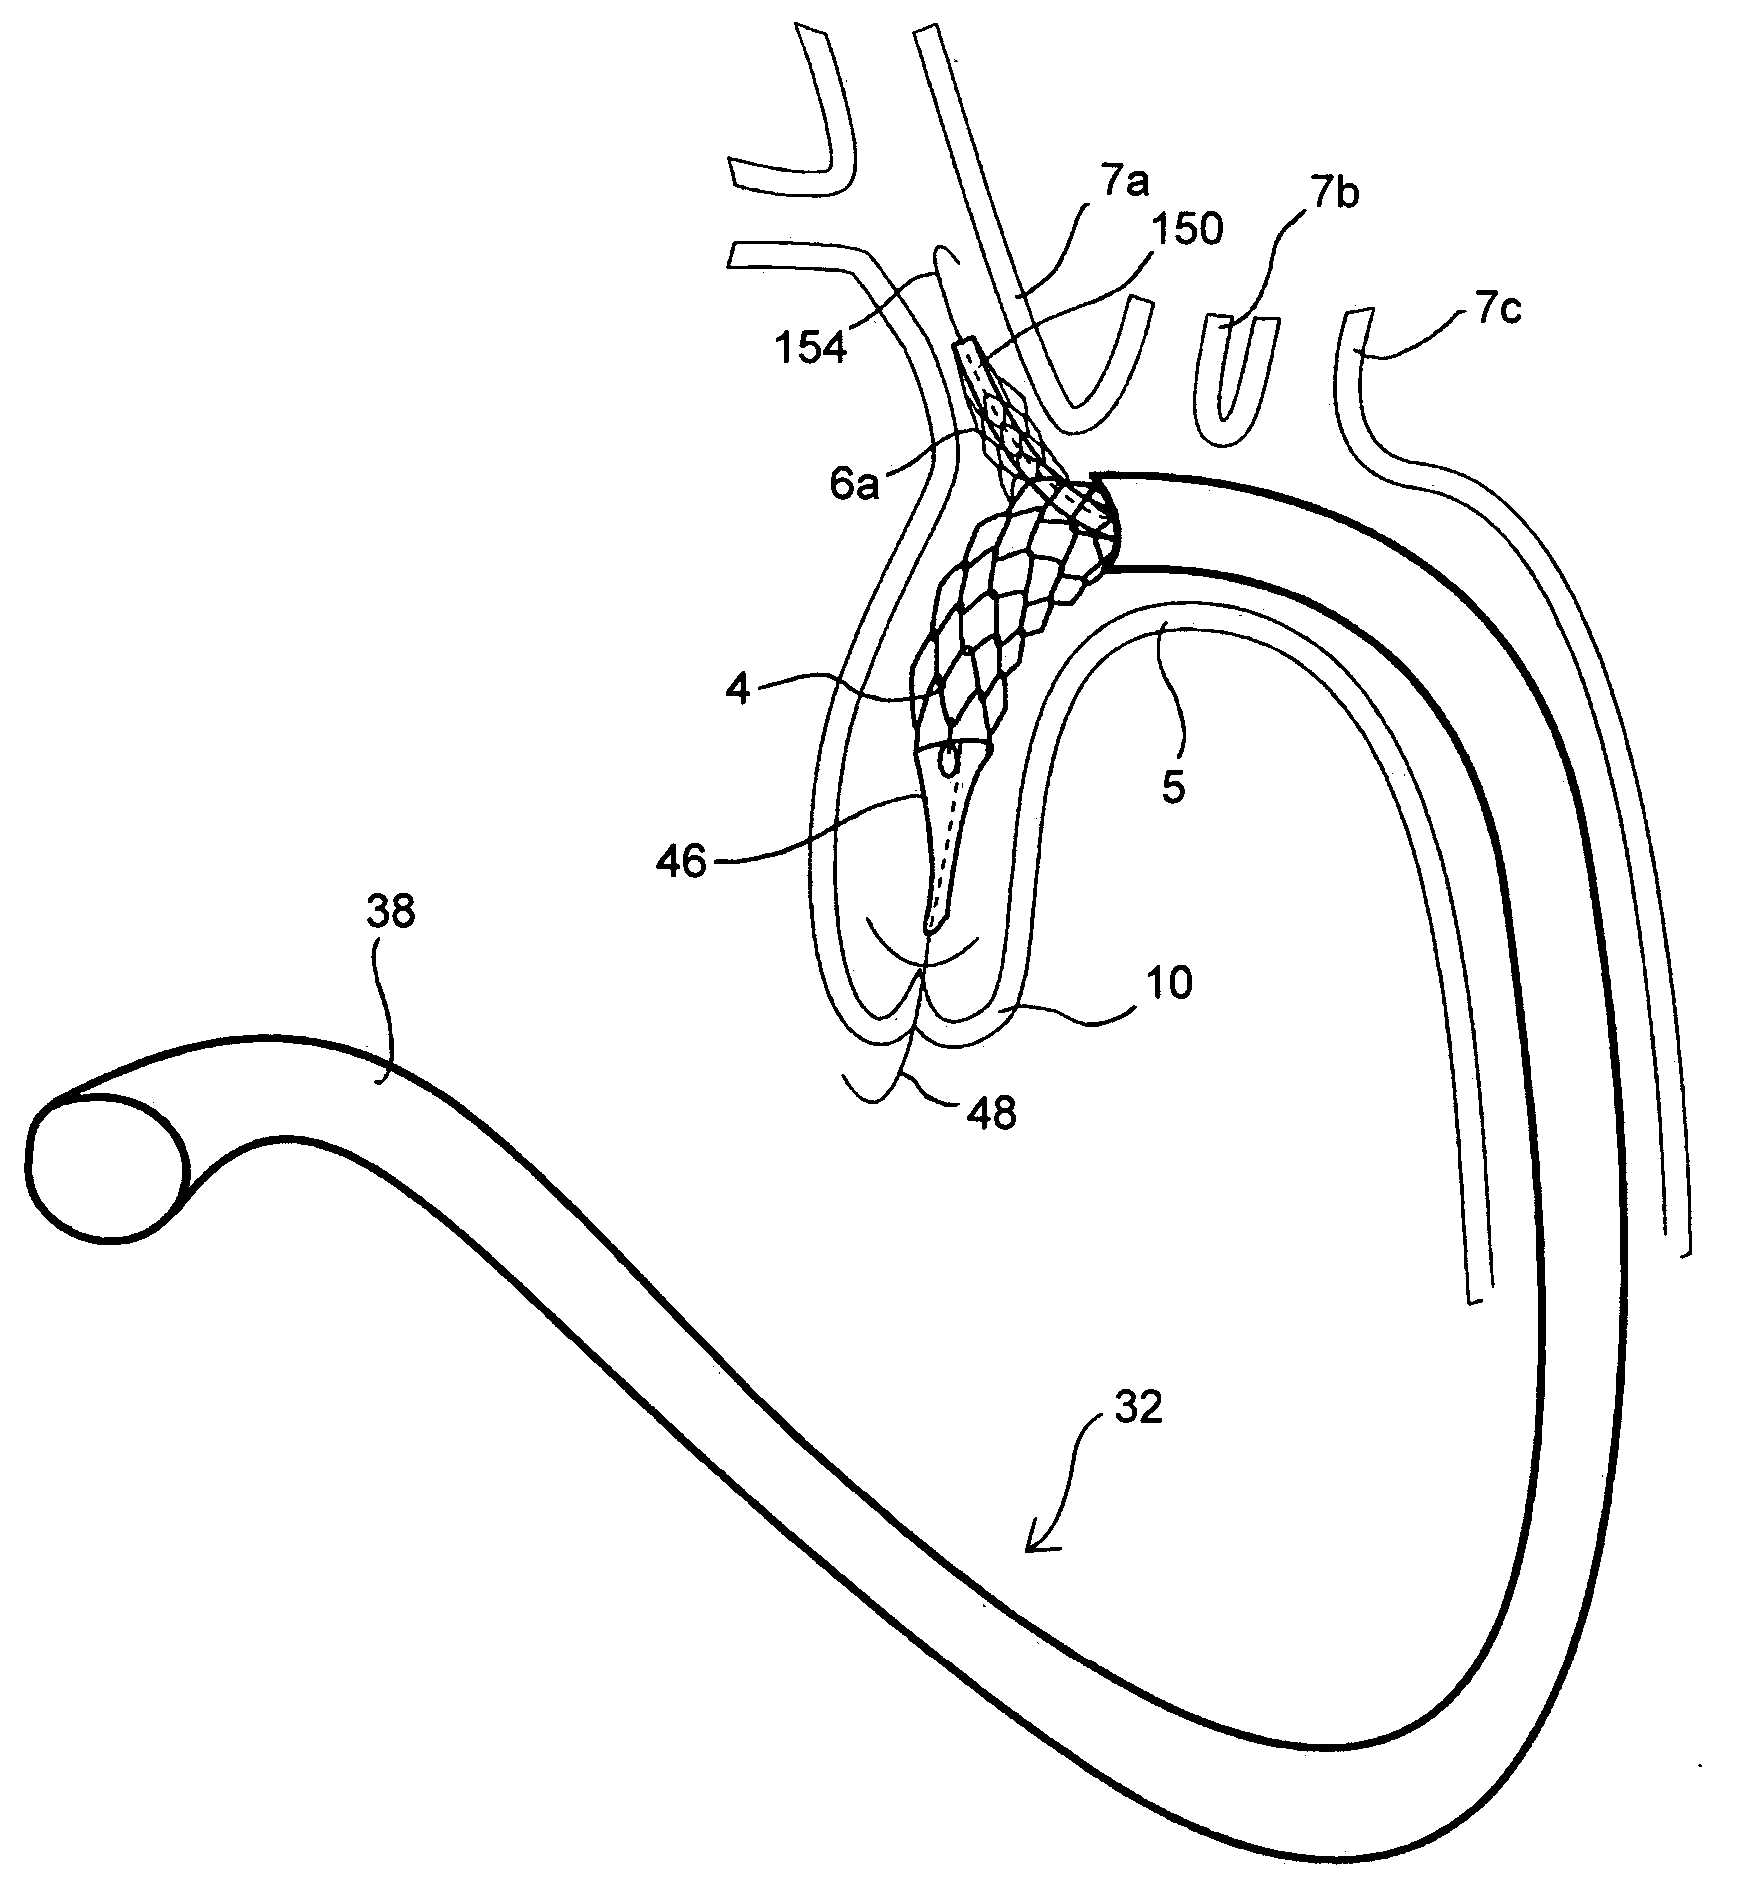 Methods for placing a stent in a branched vessel